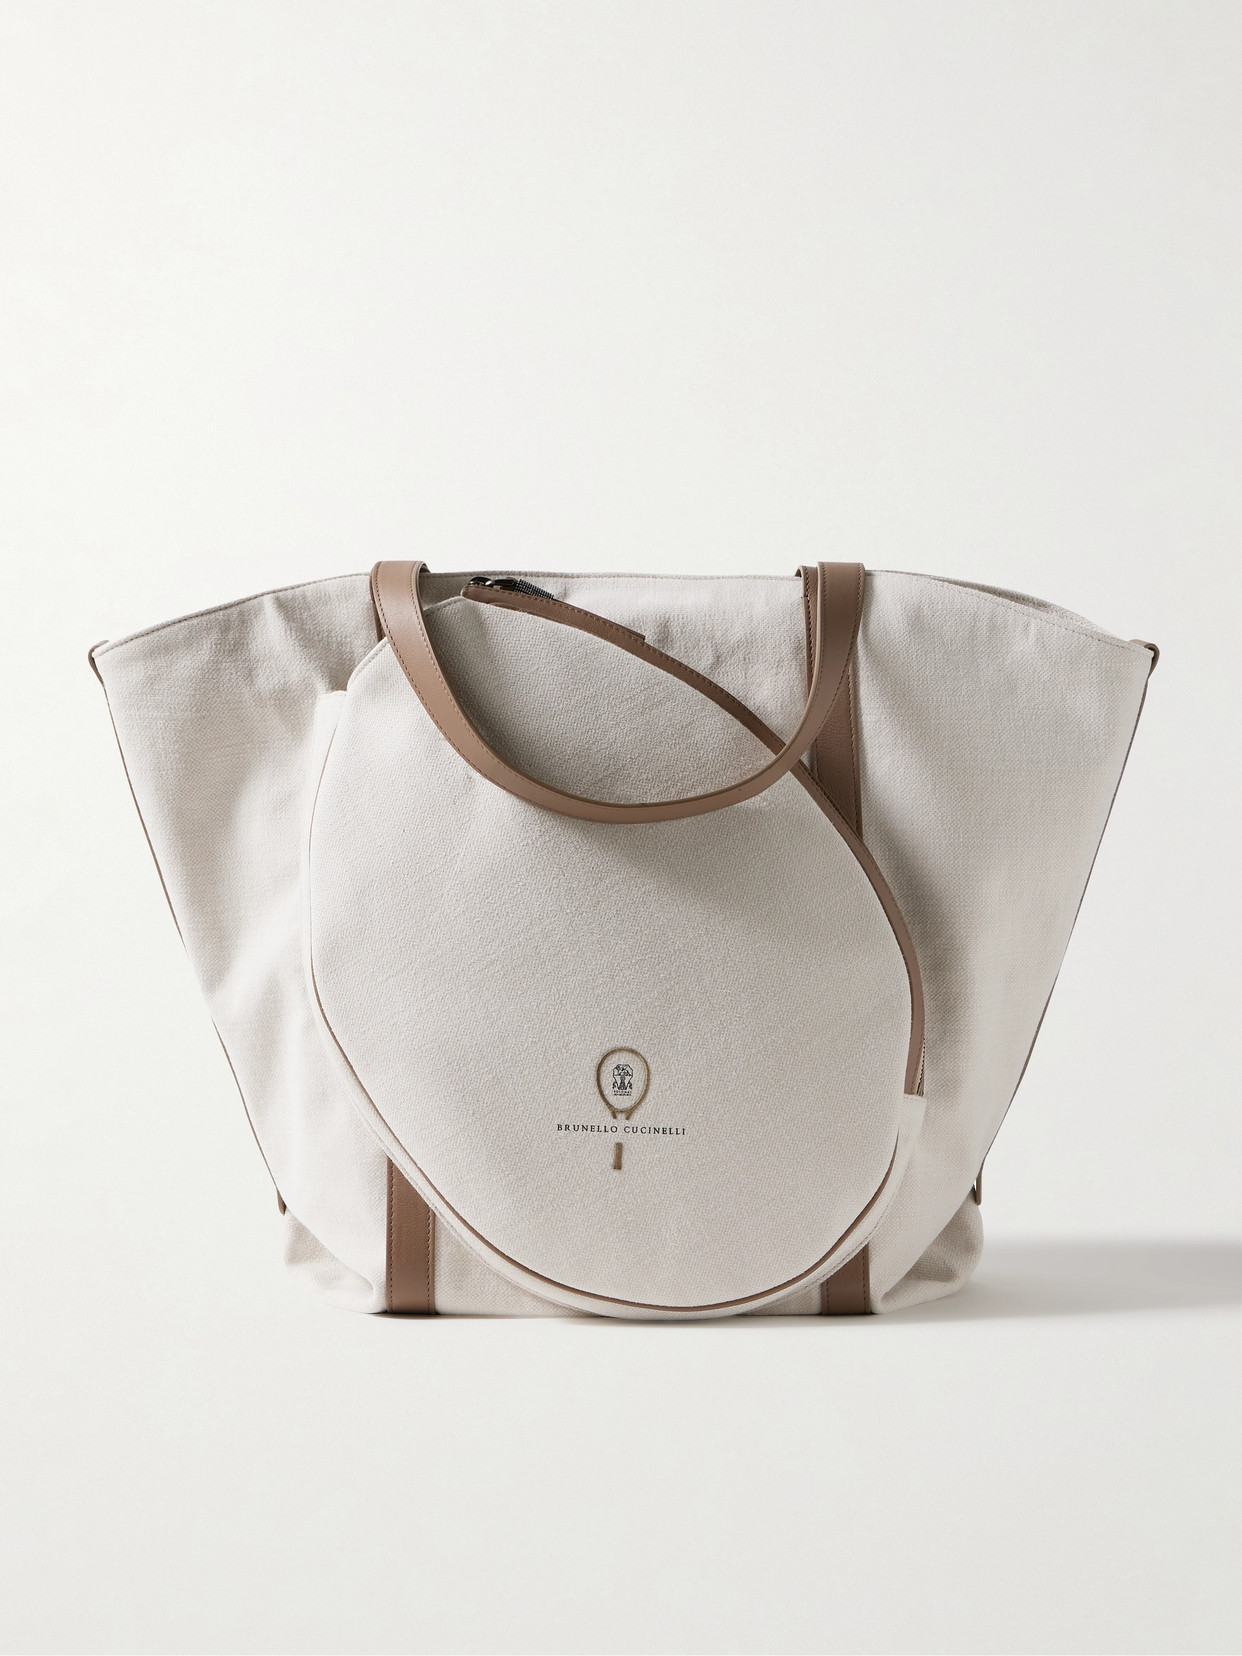 Embroidered Leather-Trimmed Cotton and Linen-Blend Canvas Tote